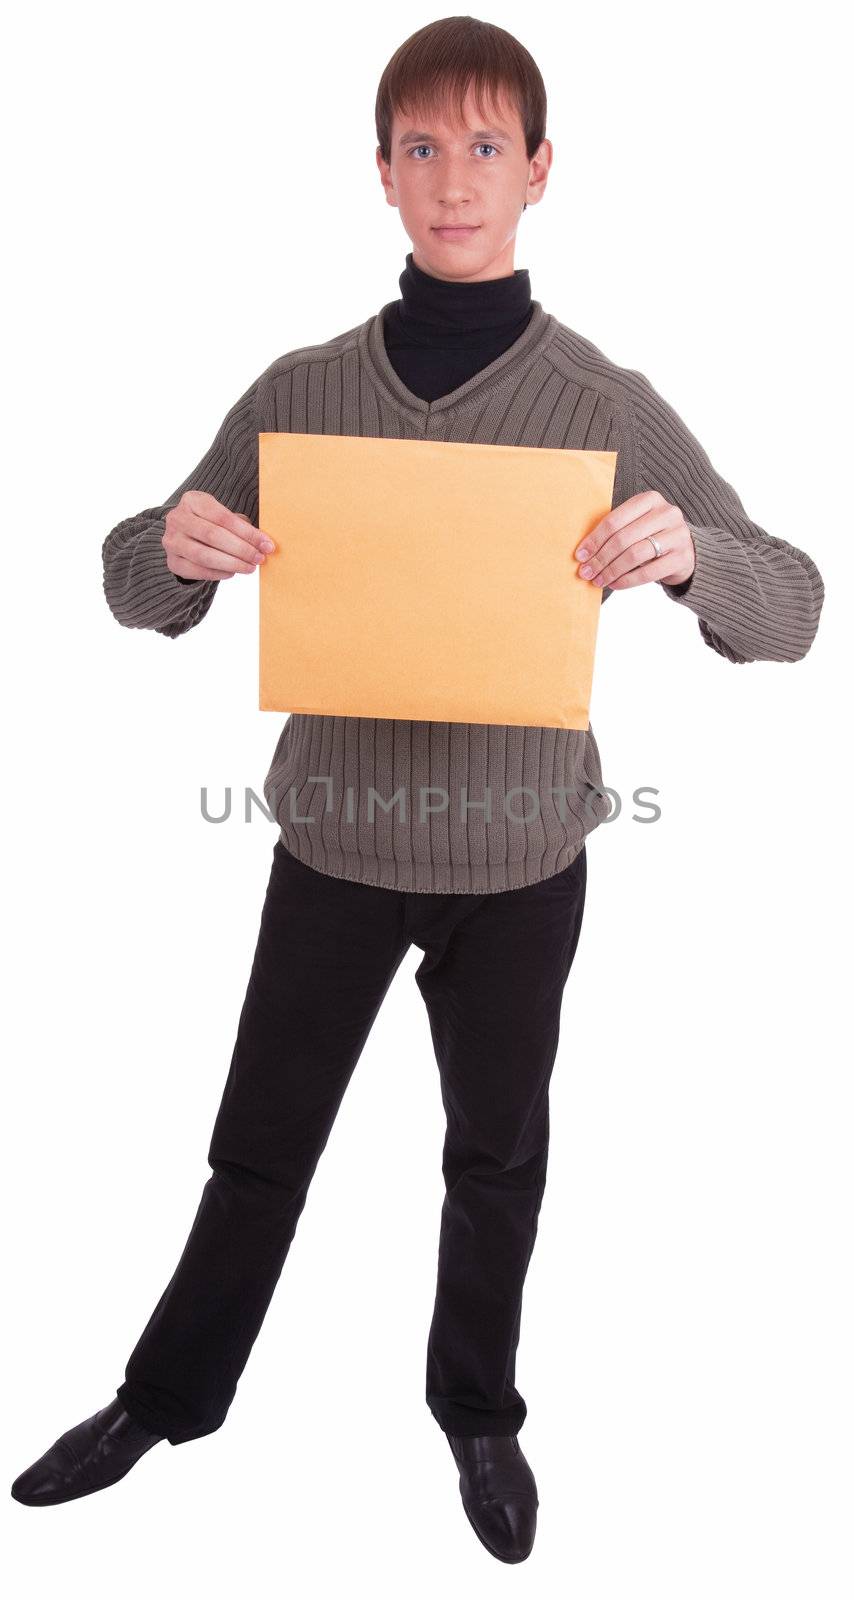 teenager - courier with a package (letter)  on white